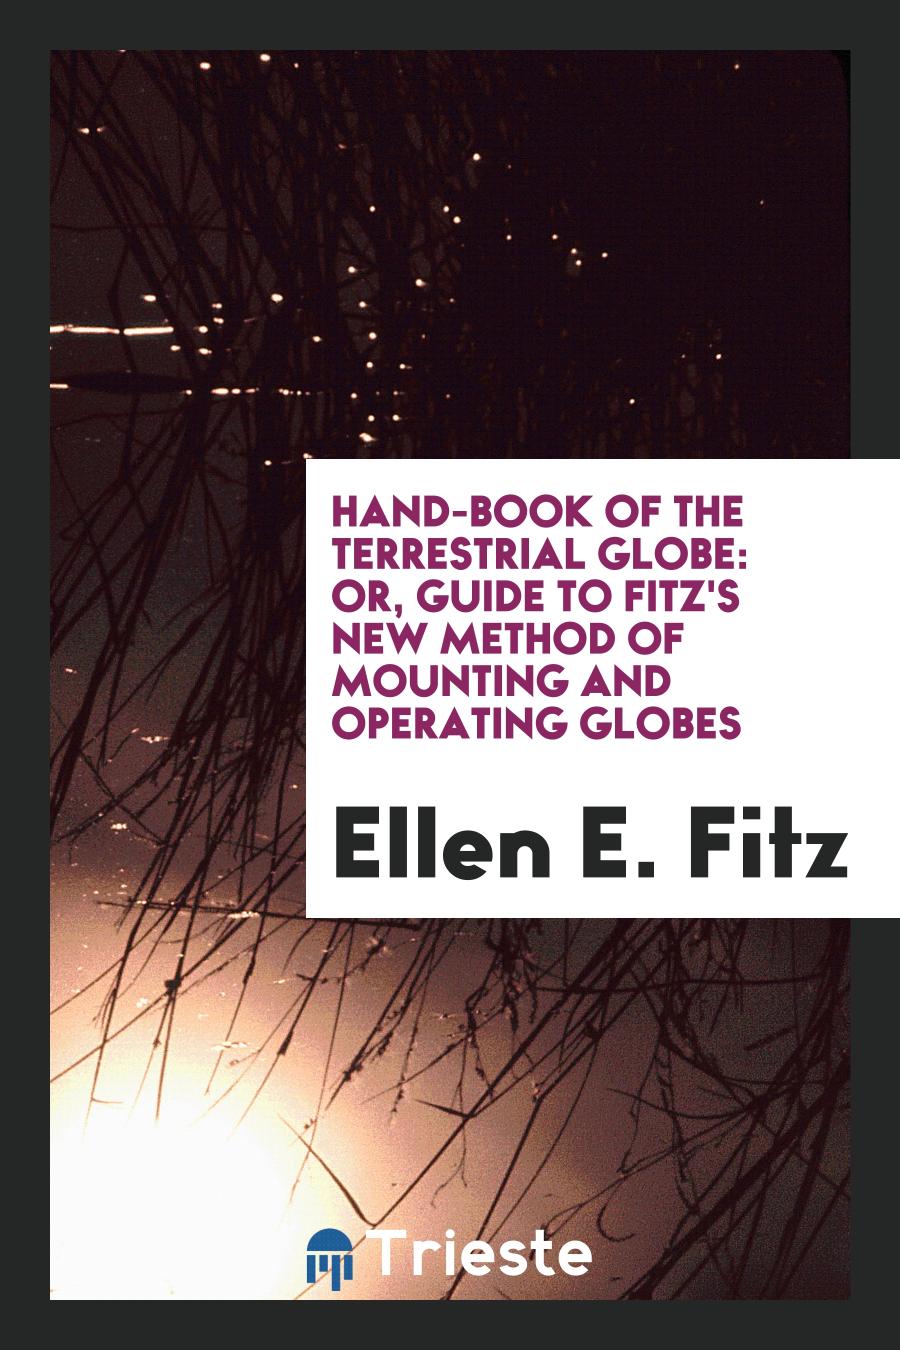 Hand-Book of the Terrestrial Globe: Or, Guide to Fitz's New Method of Mounting and Operating Globes